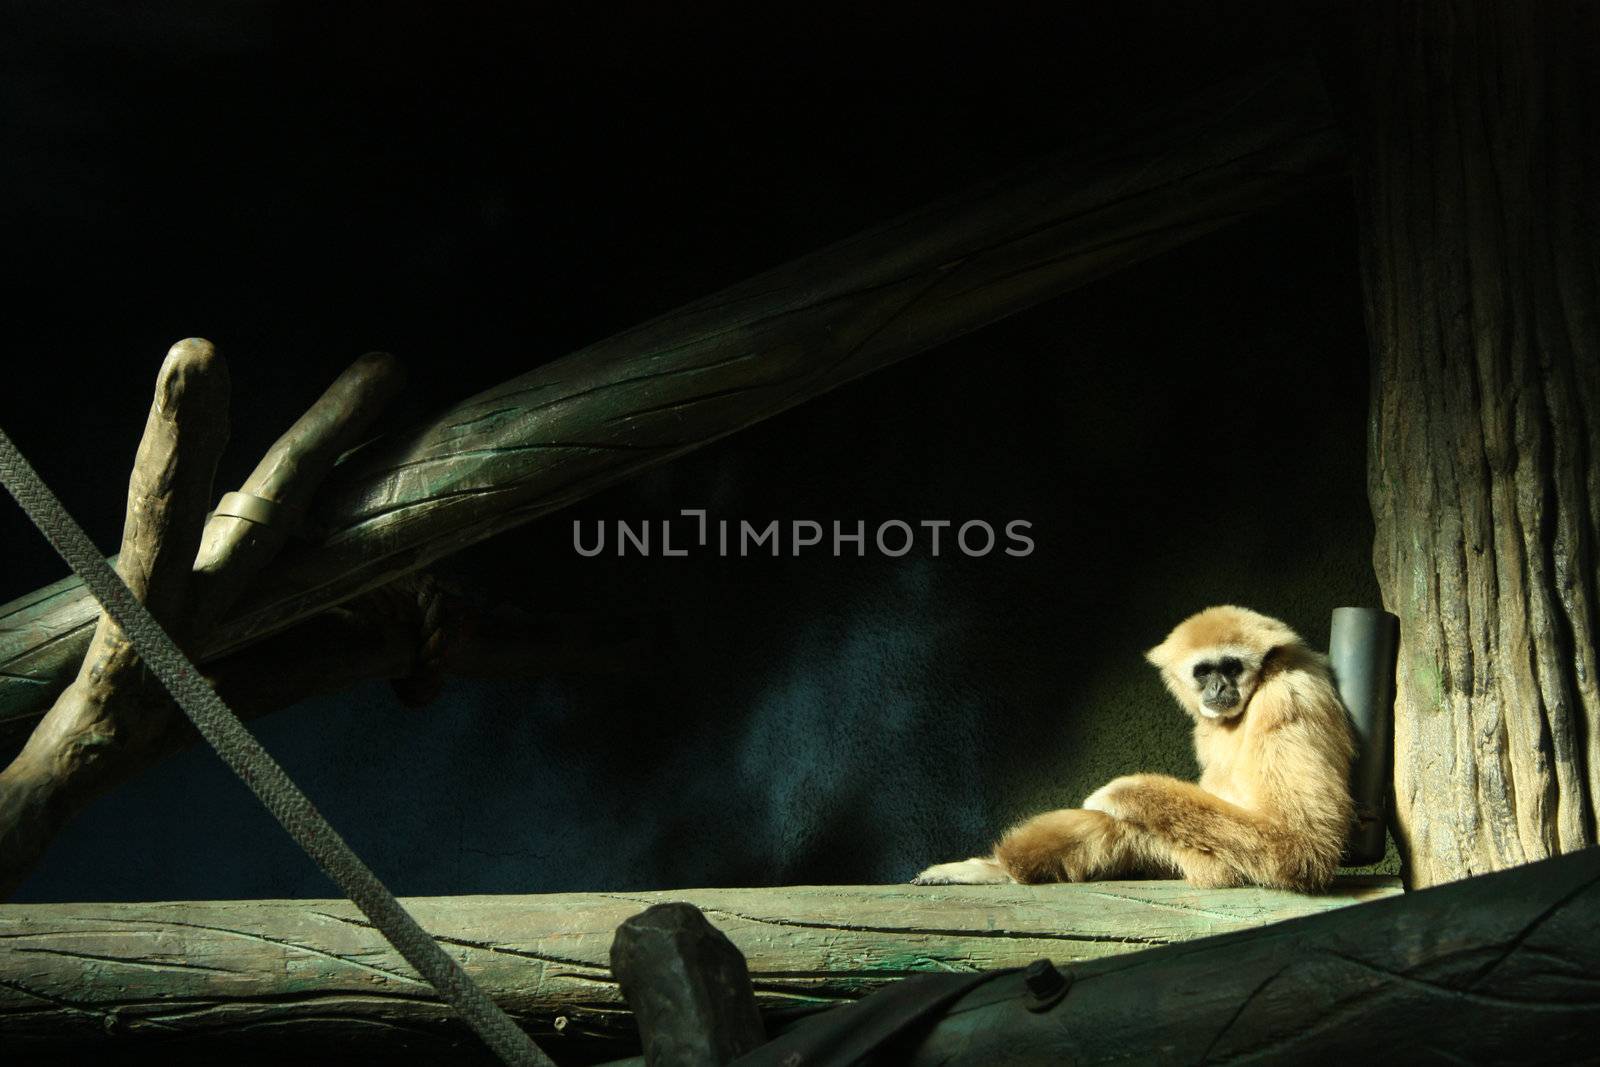 Monkey in a zoo, appearing sad.